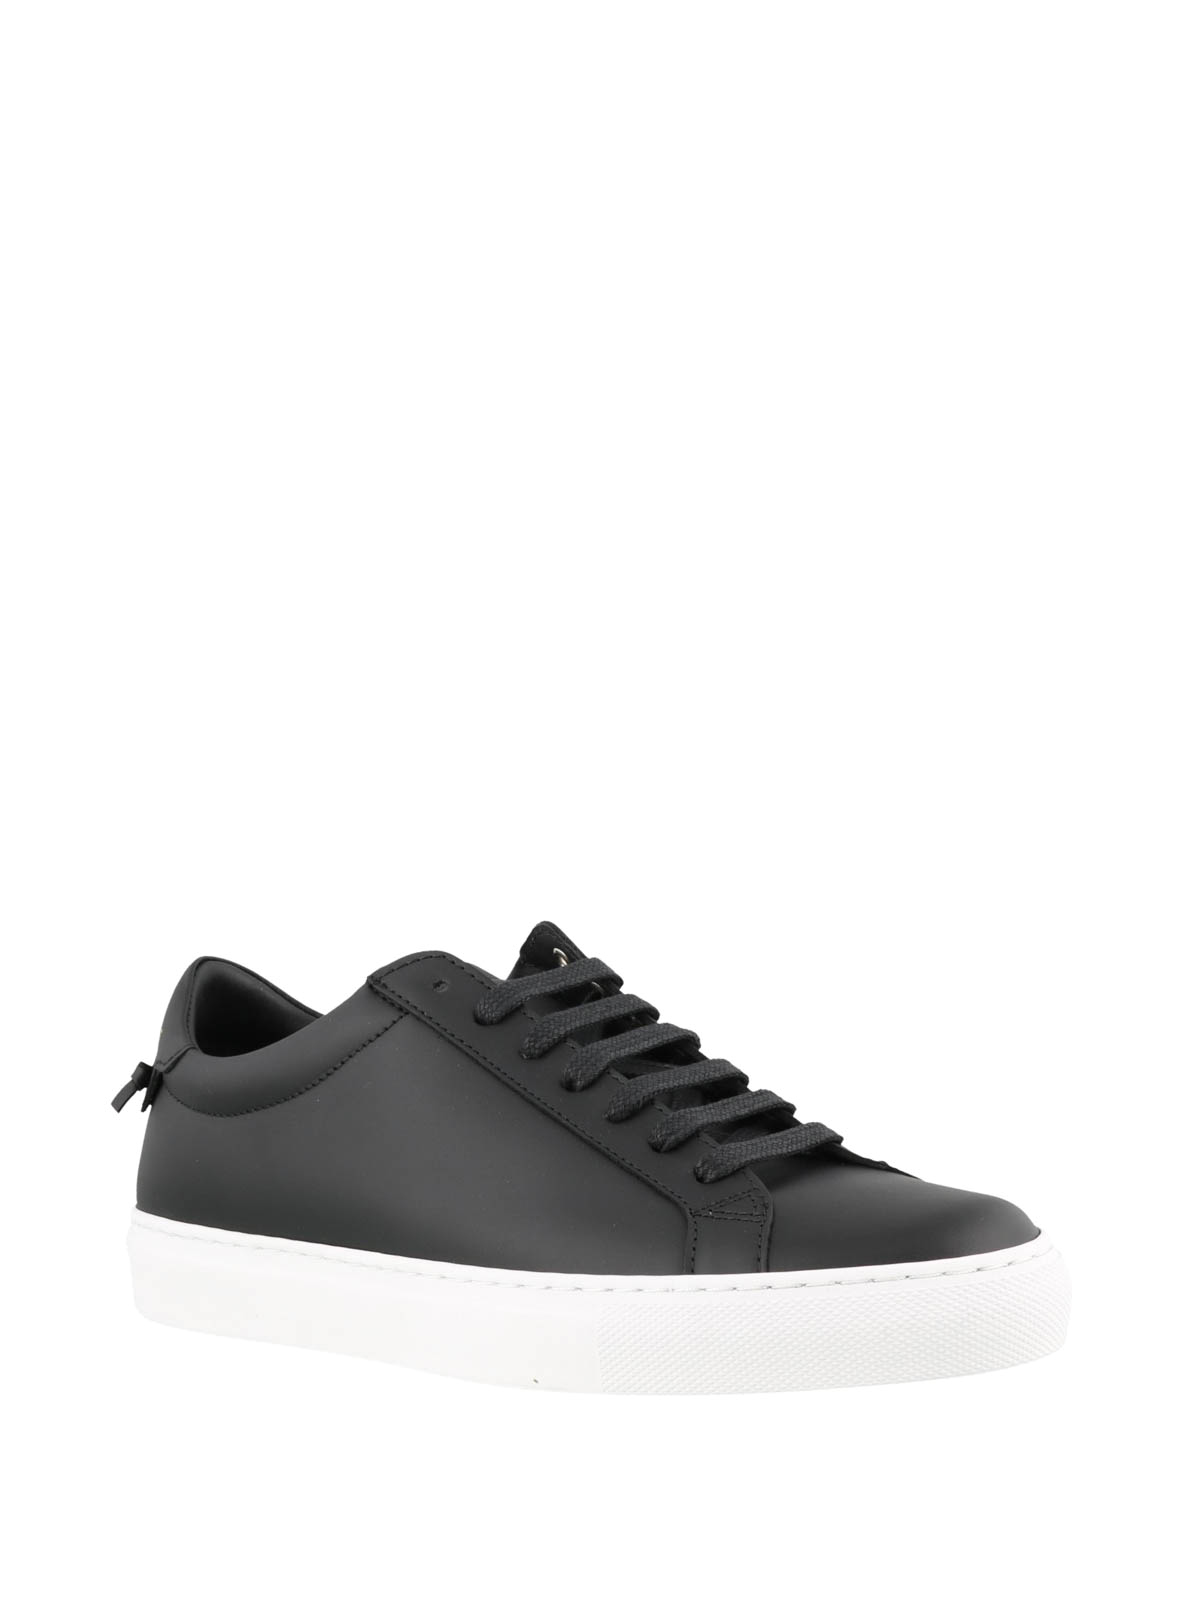 givenchy black leather sneakers